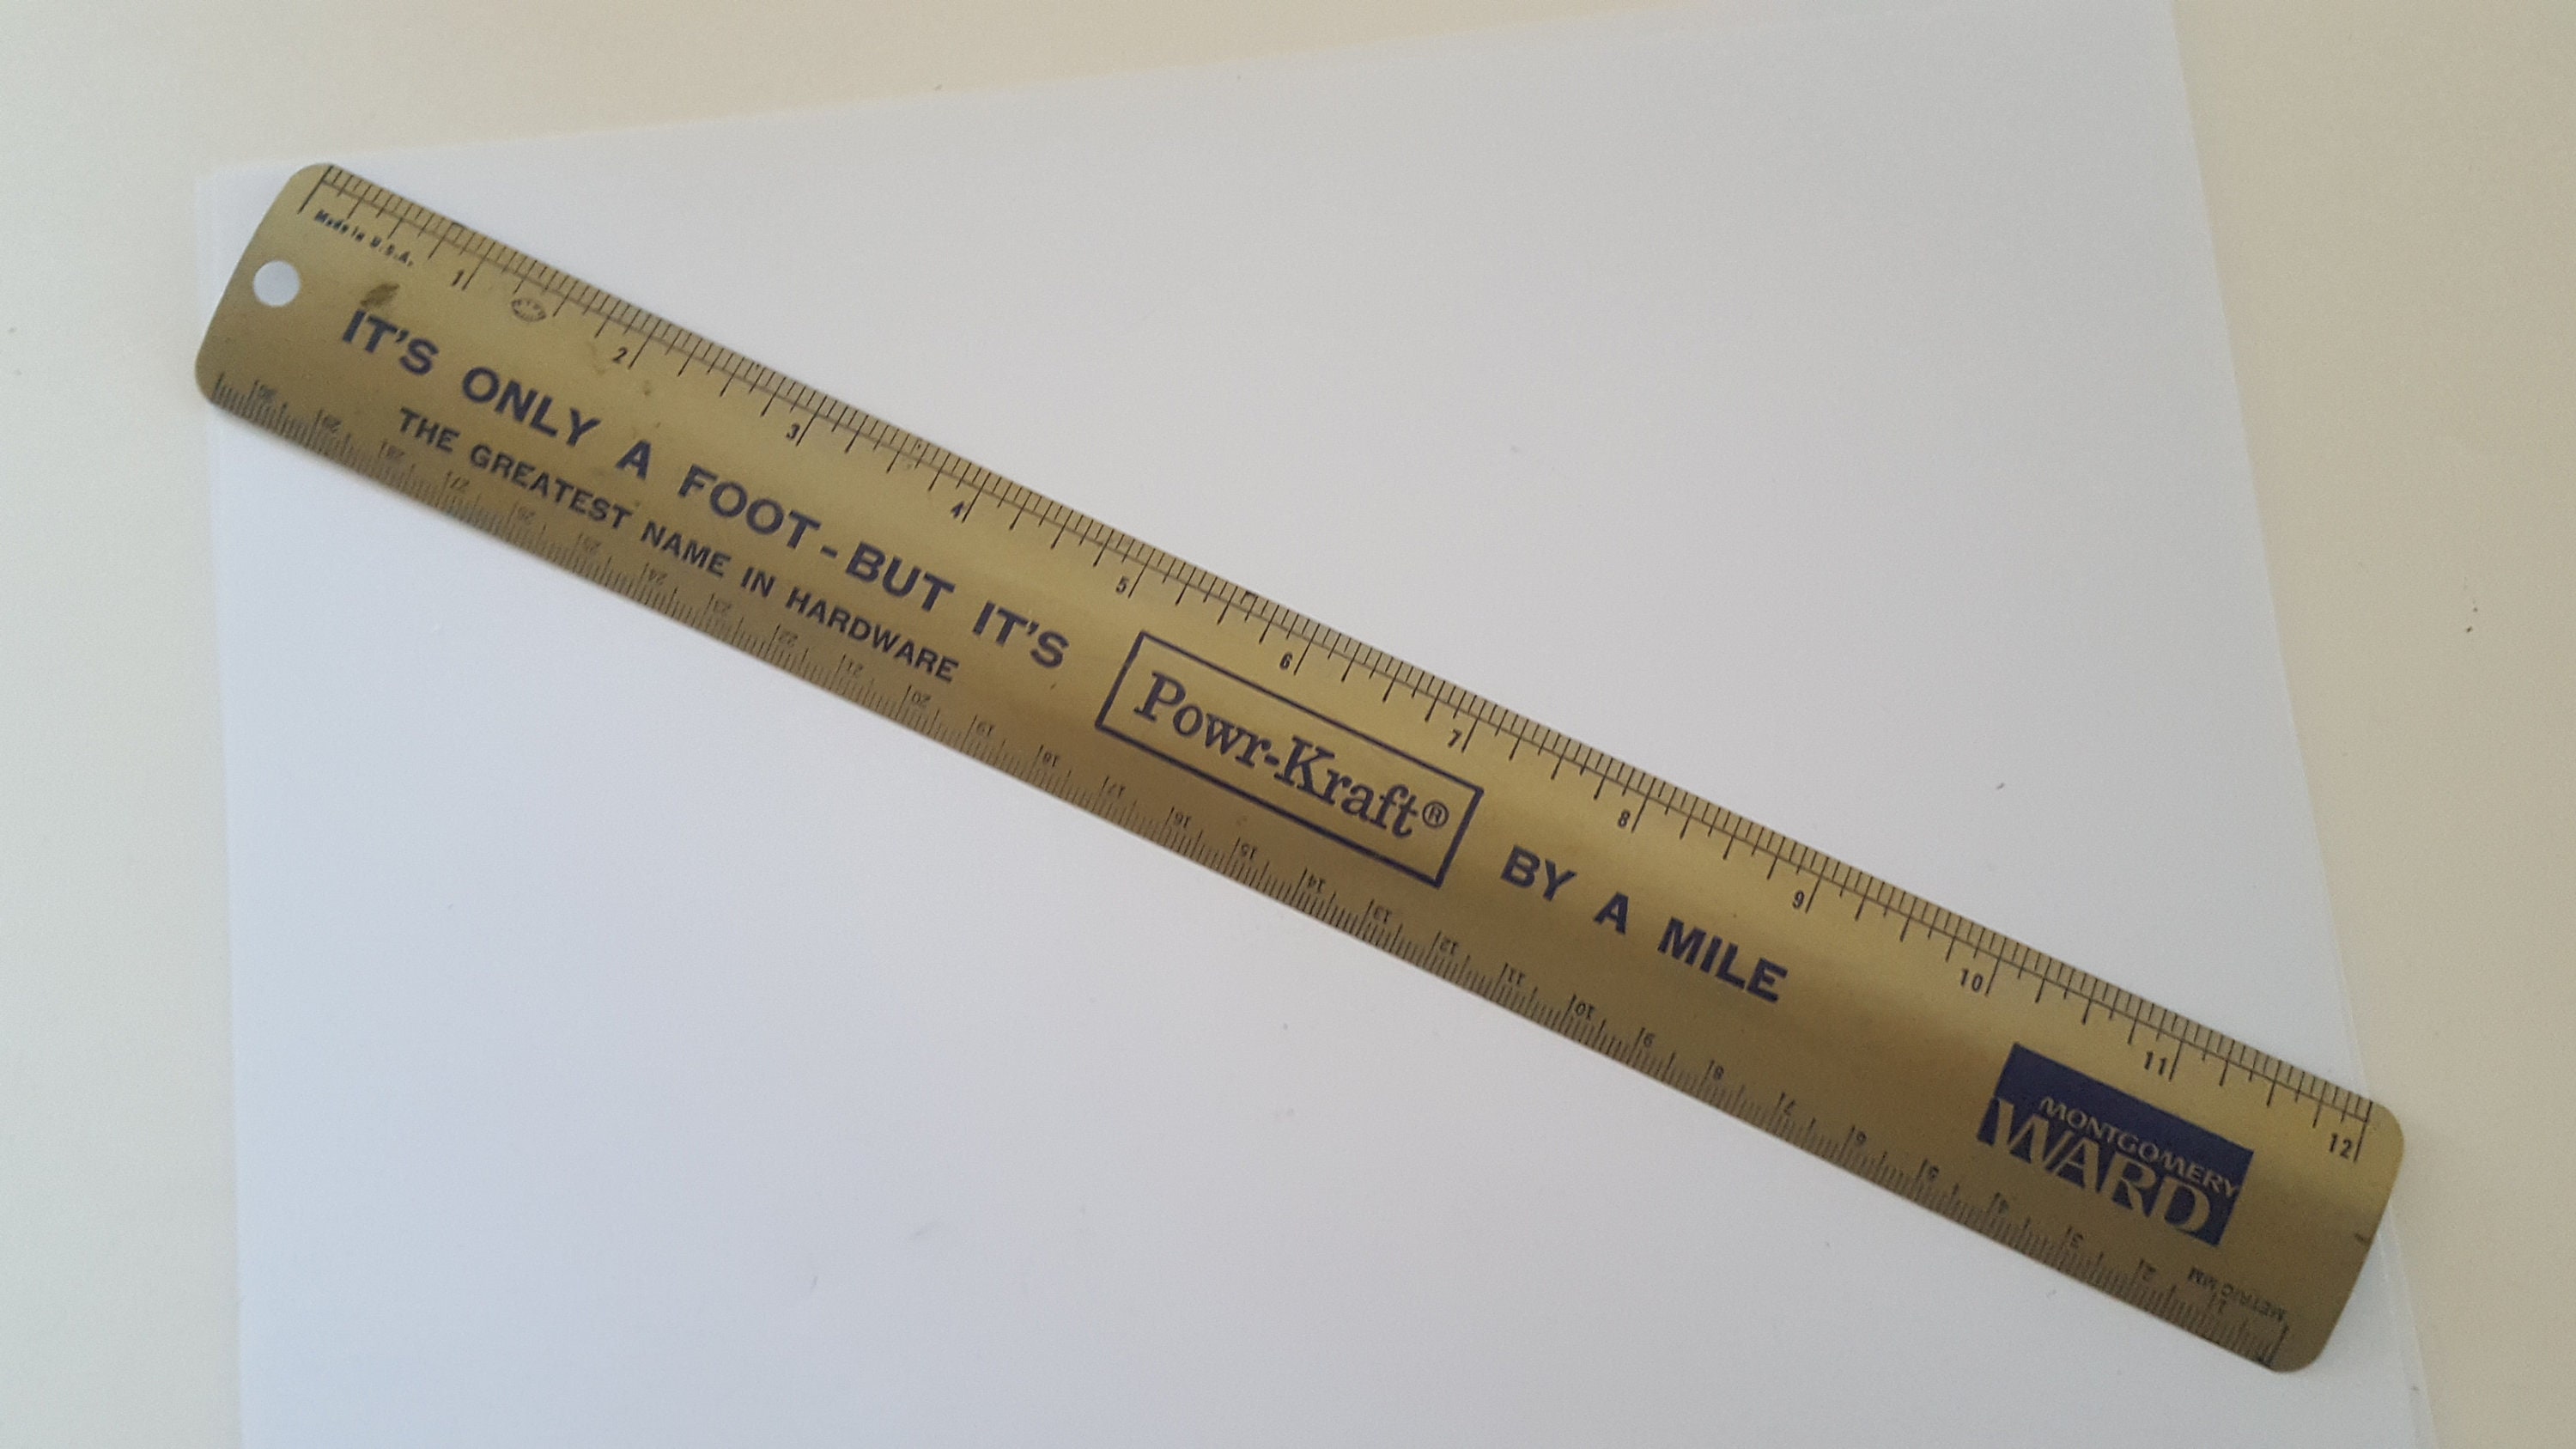 12 INCH Wood School RULER Inches Metric & Imperial Measurements